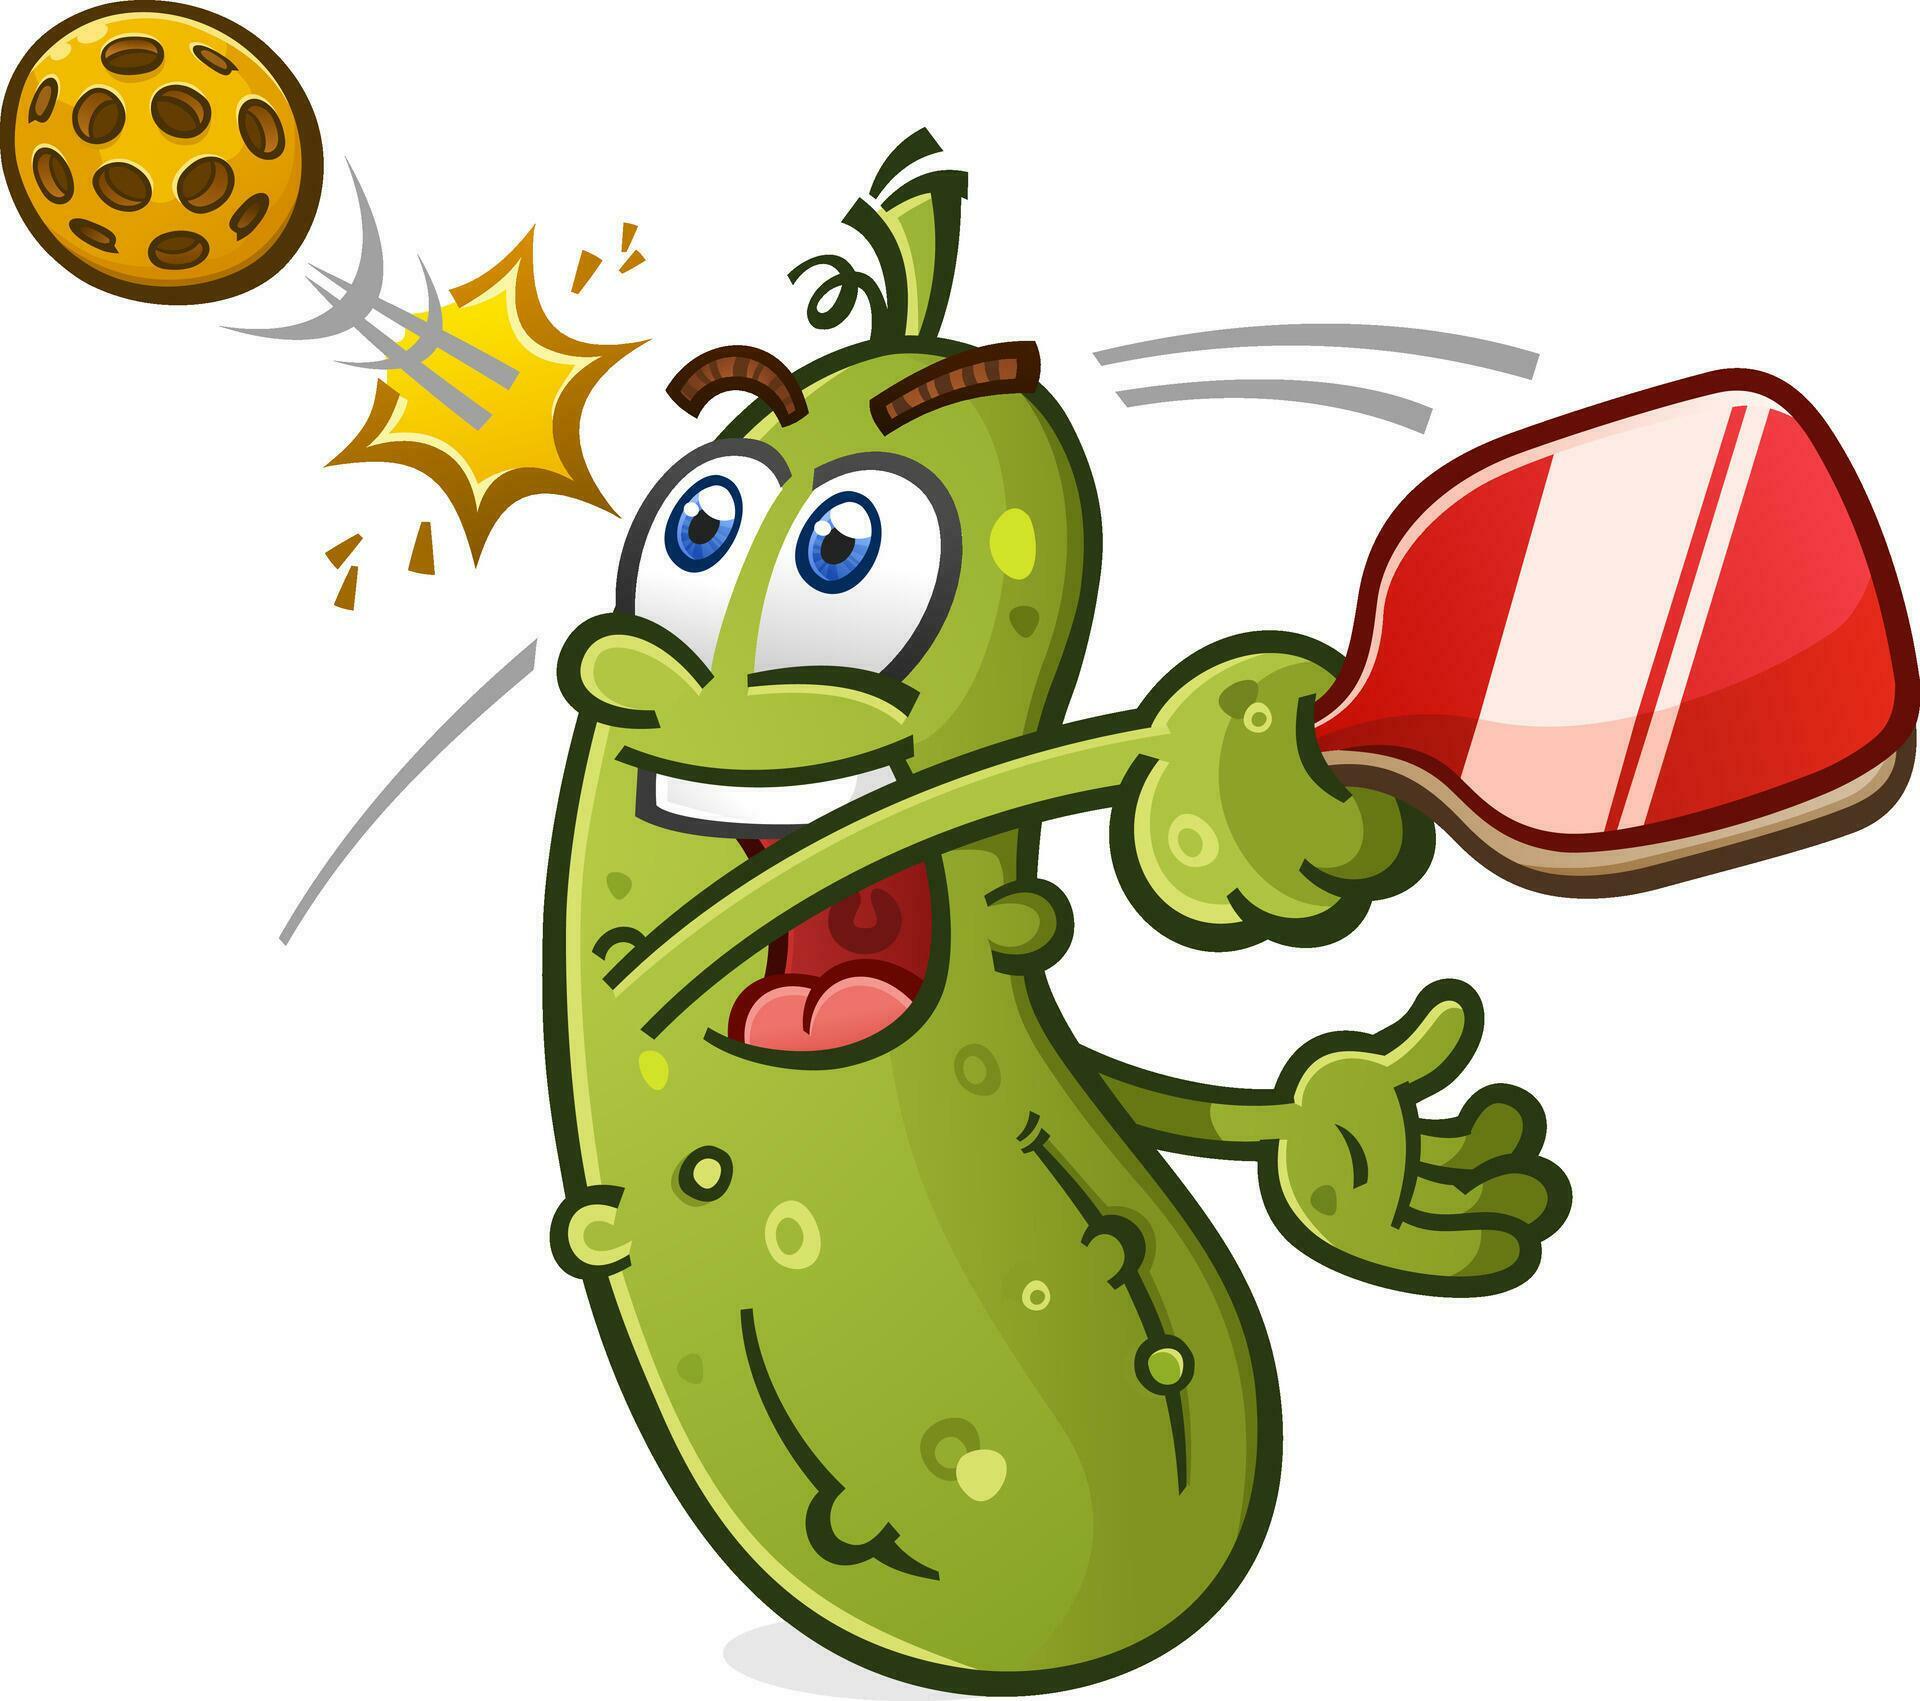 Pickle cartoon character taking a fast swing and hitting a pickleball ...